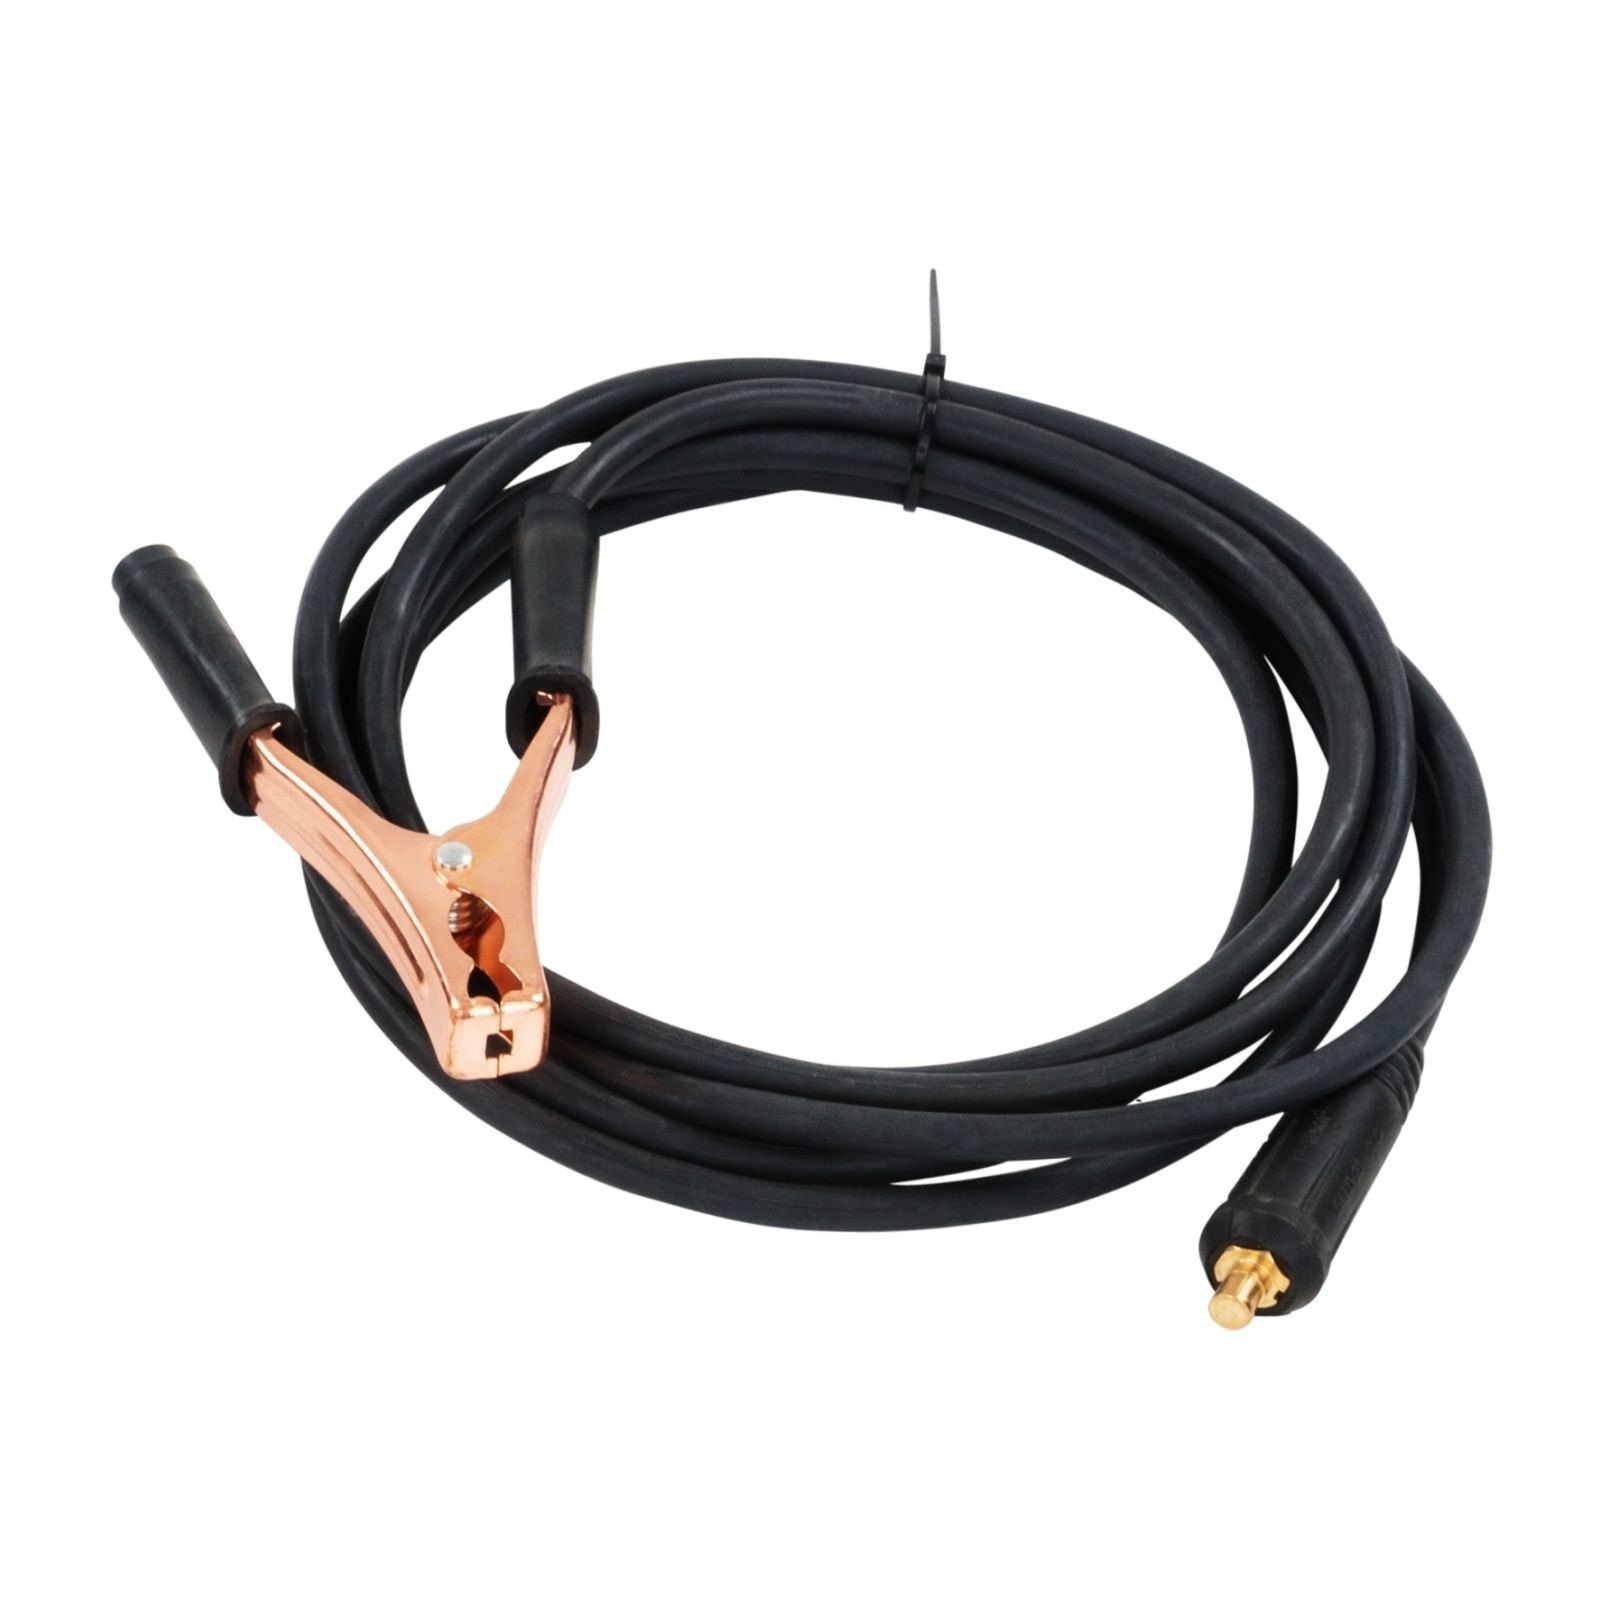 Mass cable with a clamp for welding machines and plasma cutters, 4m long